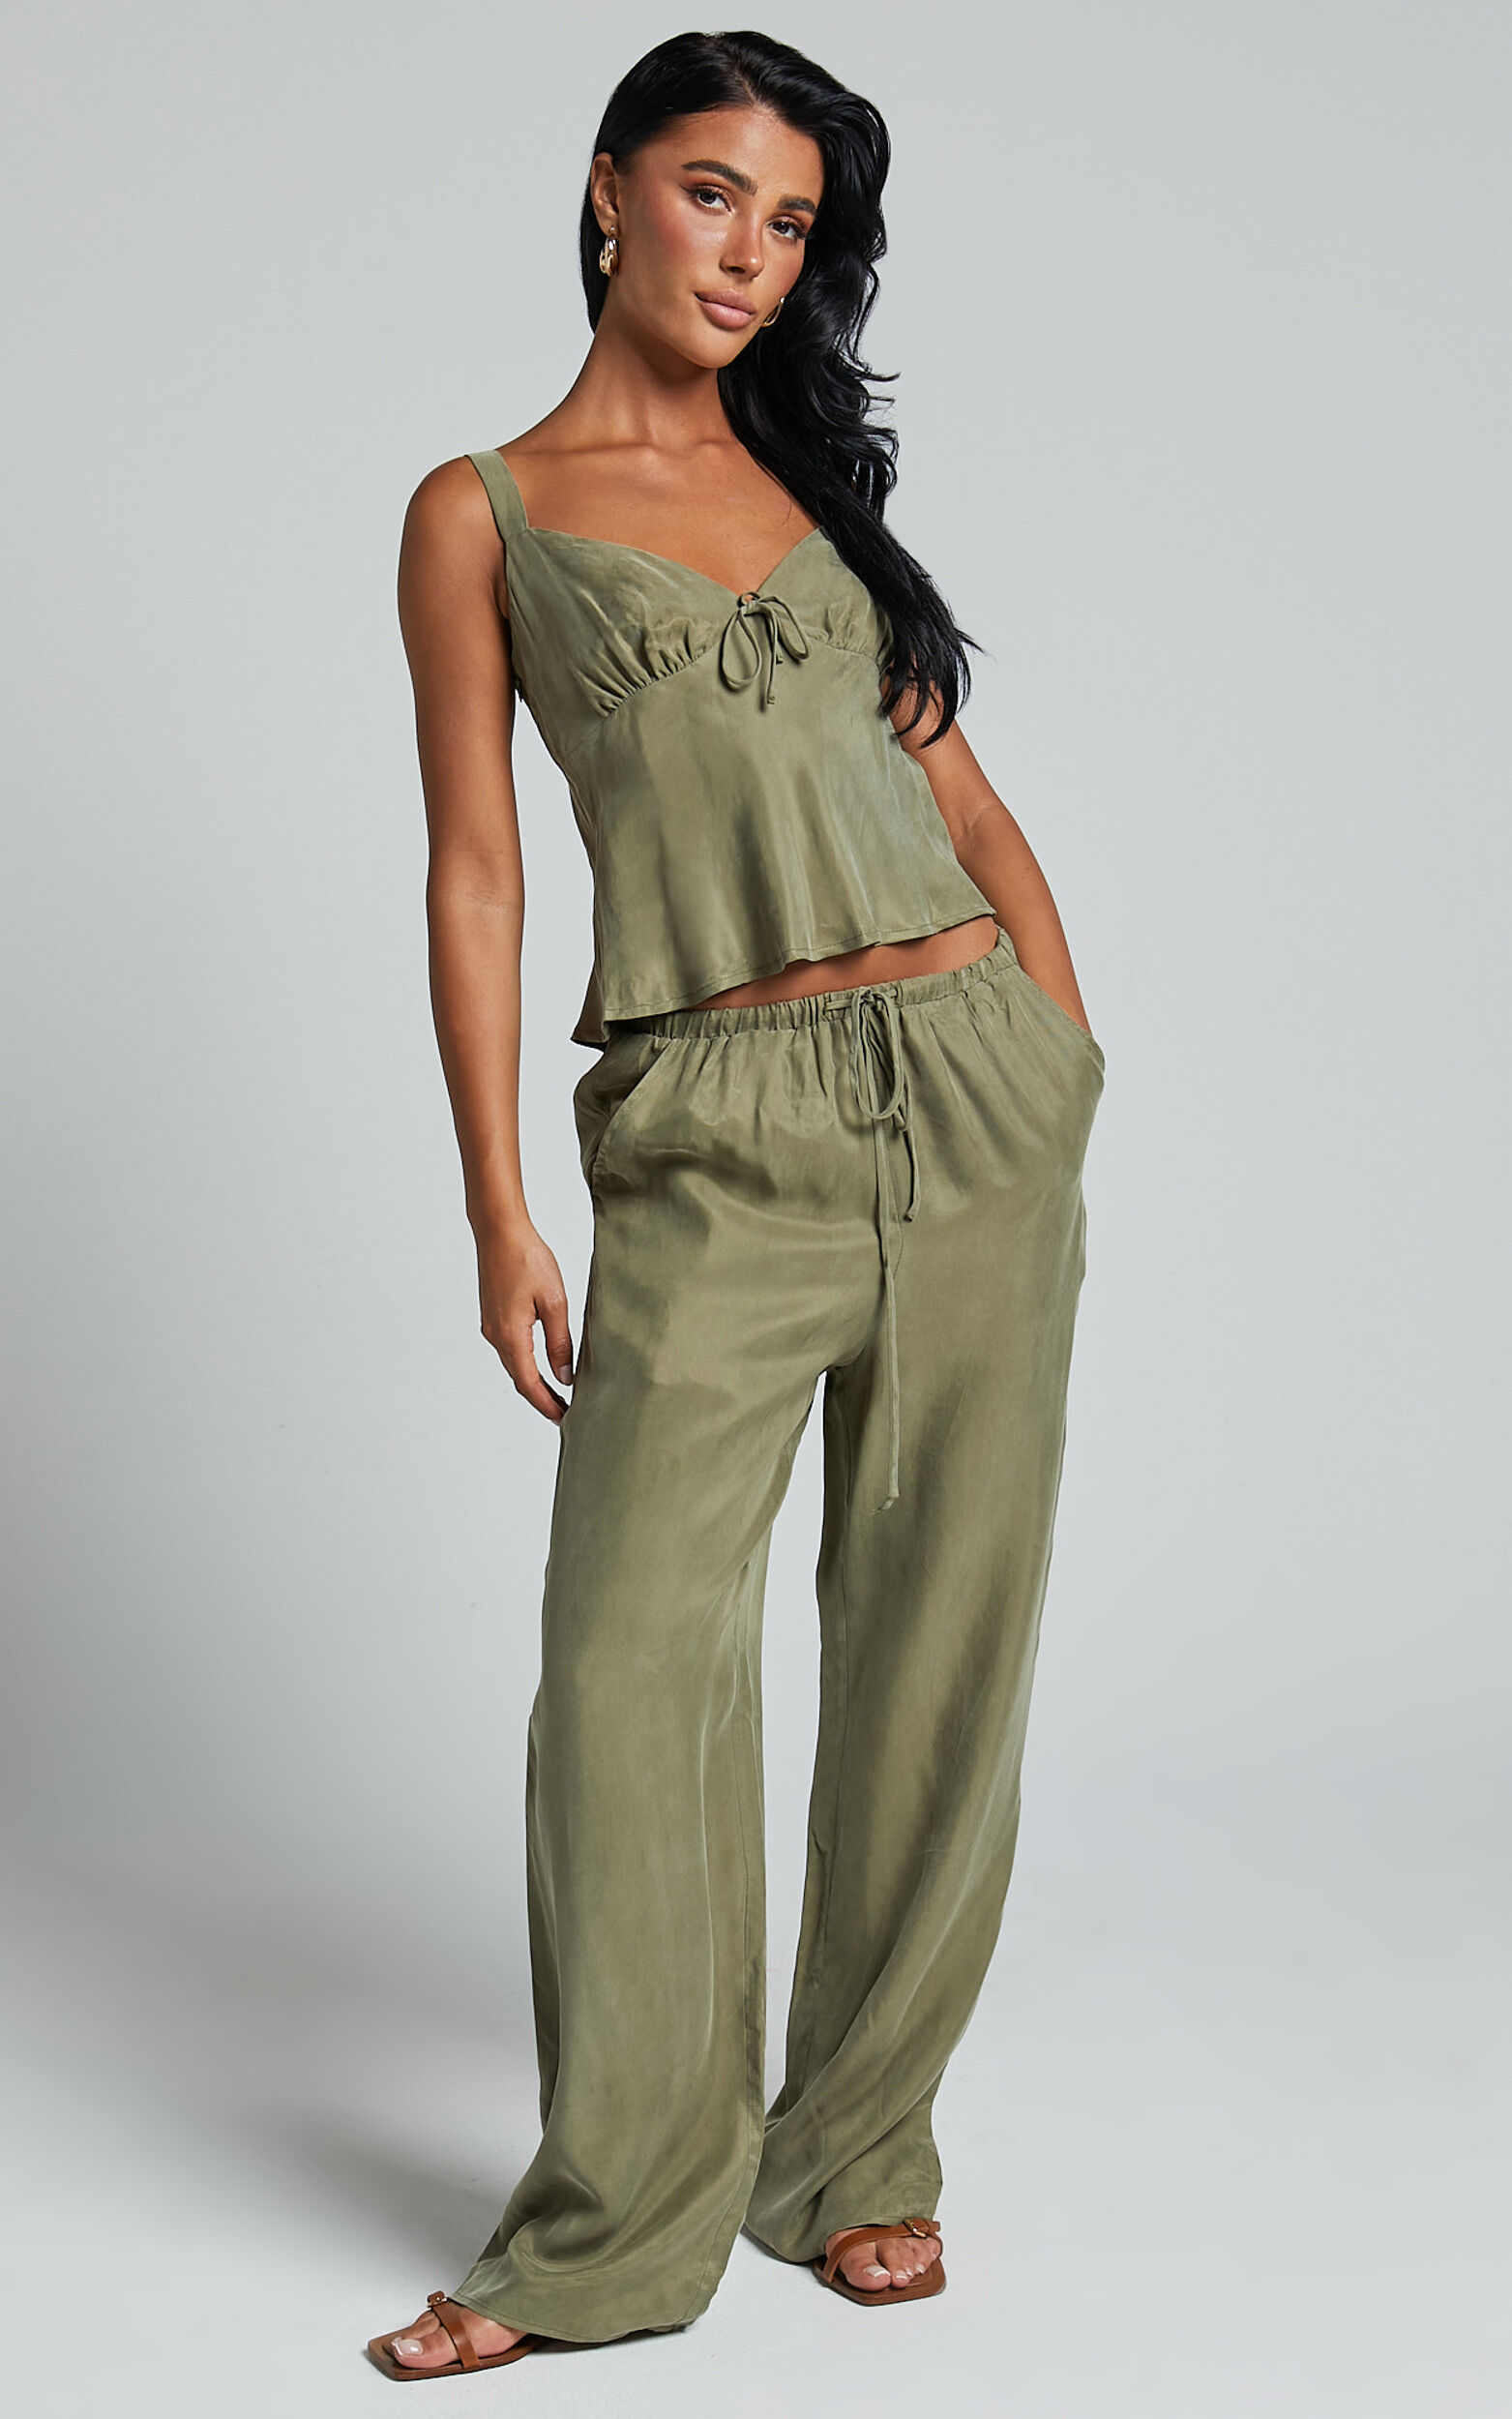 https://images.showpo.com/dw/image/v2/BDPQ_PRD/on/demandware.static/-/Sites-sp-master-catalog/default/dw4b564059/images/chaya-pants-cupro-mid-waisted-drawstring-pants-SB24010013/Chaya_Pants_-_Cupro_Mid_Waisted_Drawstring_Pants_in_Moss__1.JPG?sw=1563&sh=2500